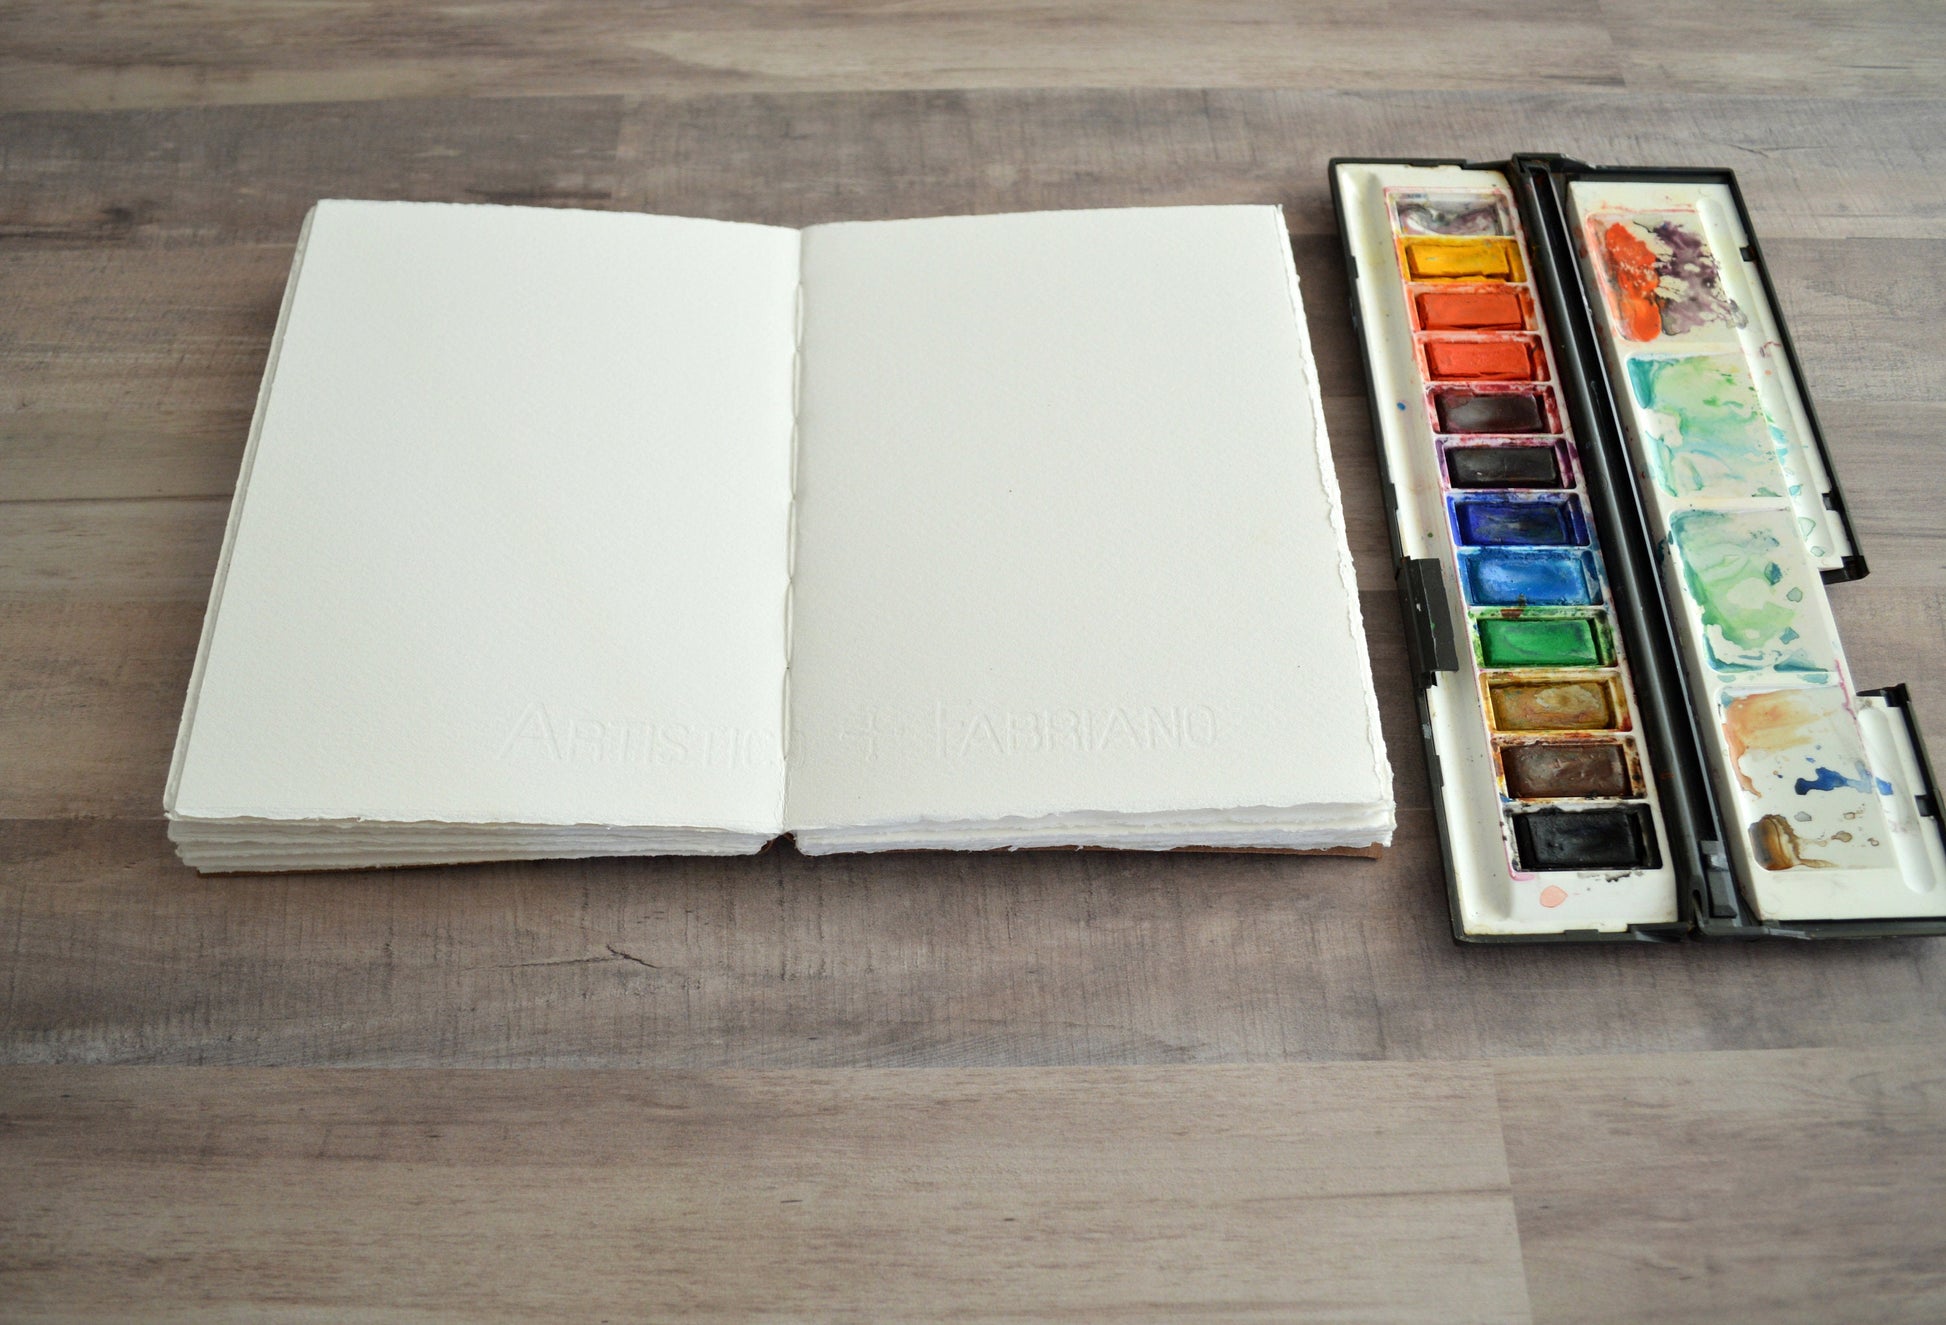 Fabriano Artist Sketchbook Journal – The Art Trading Company